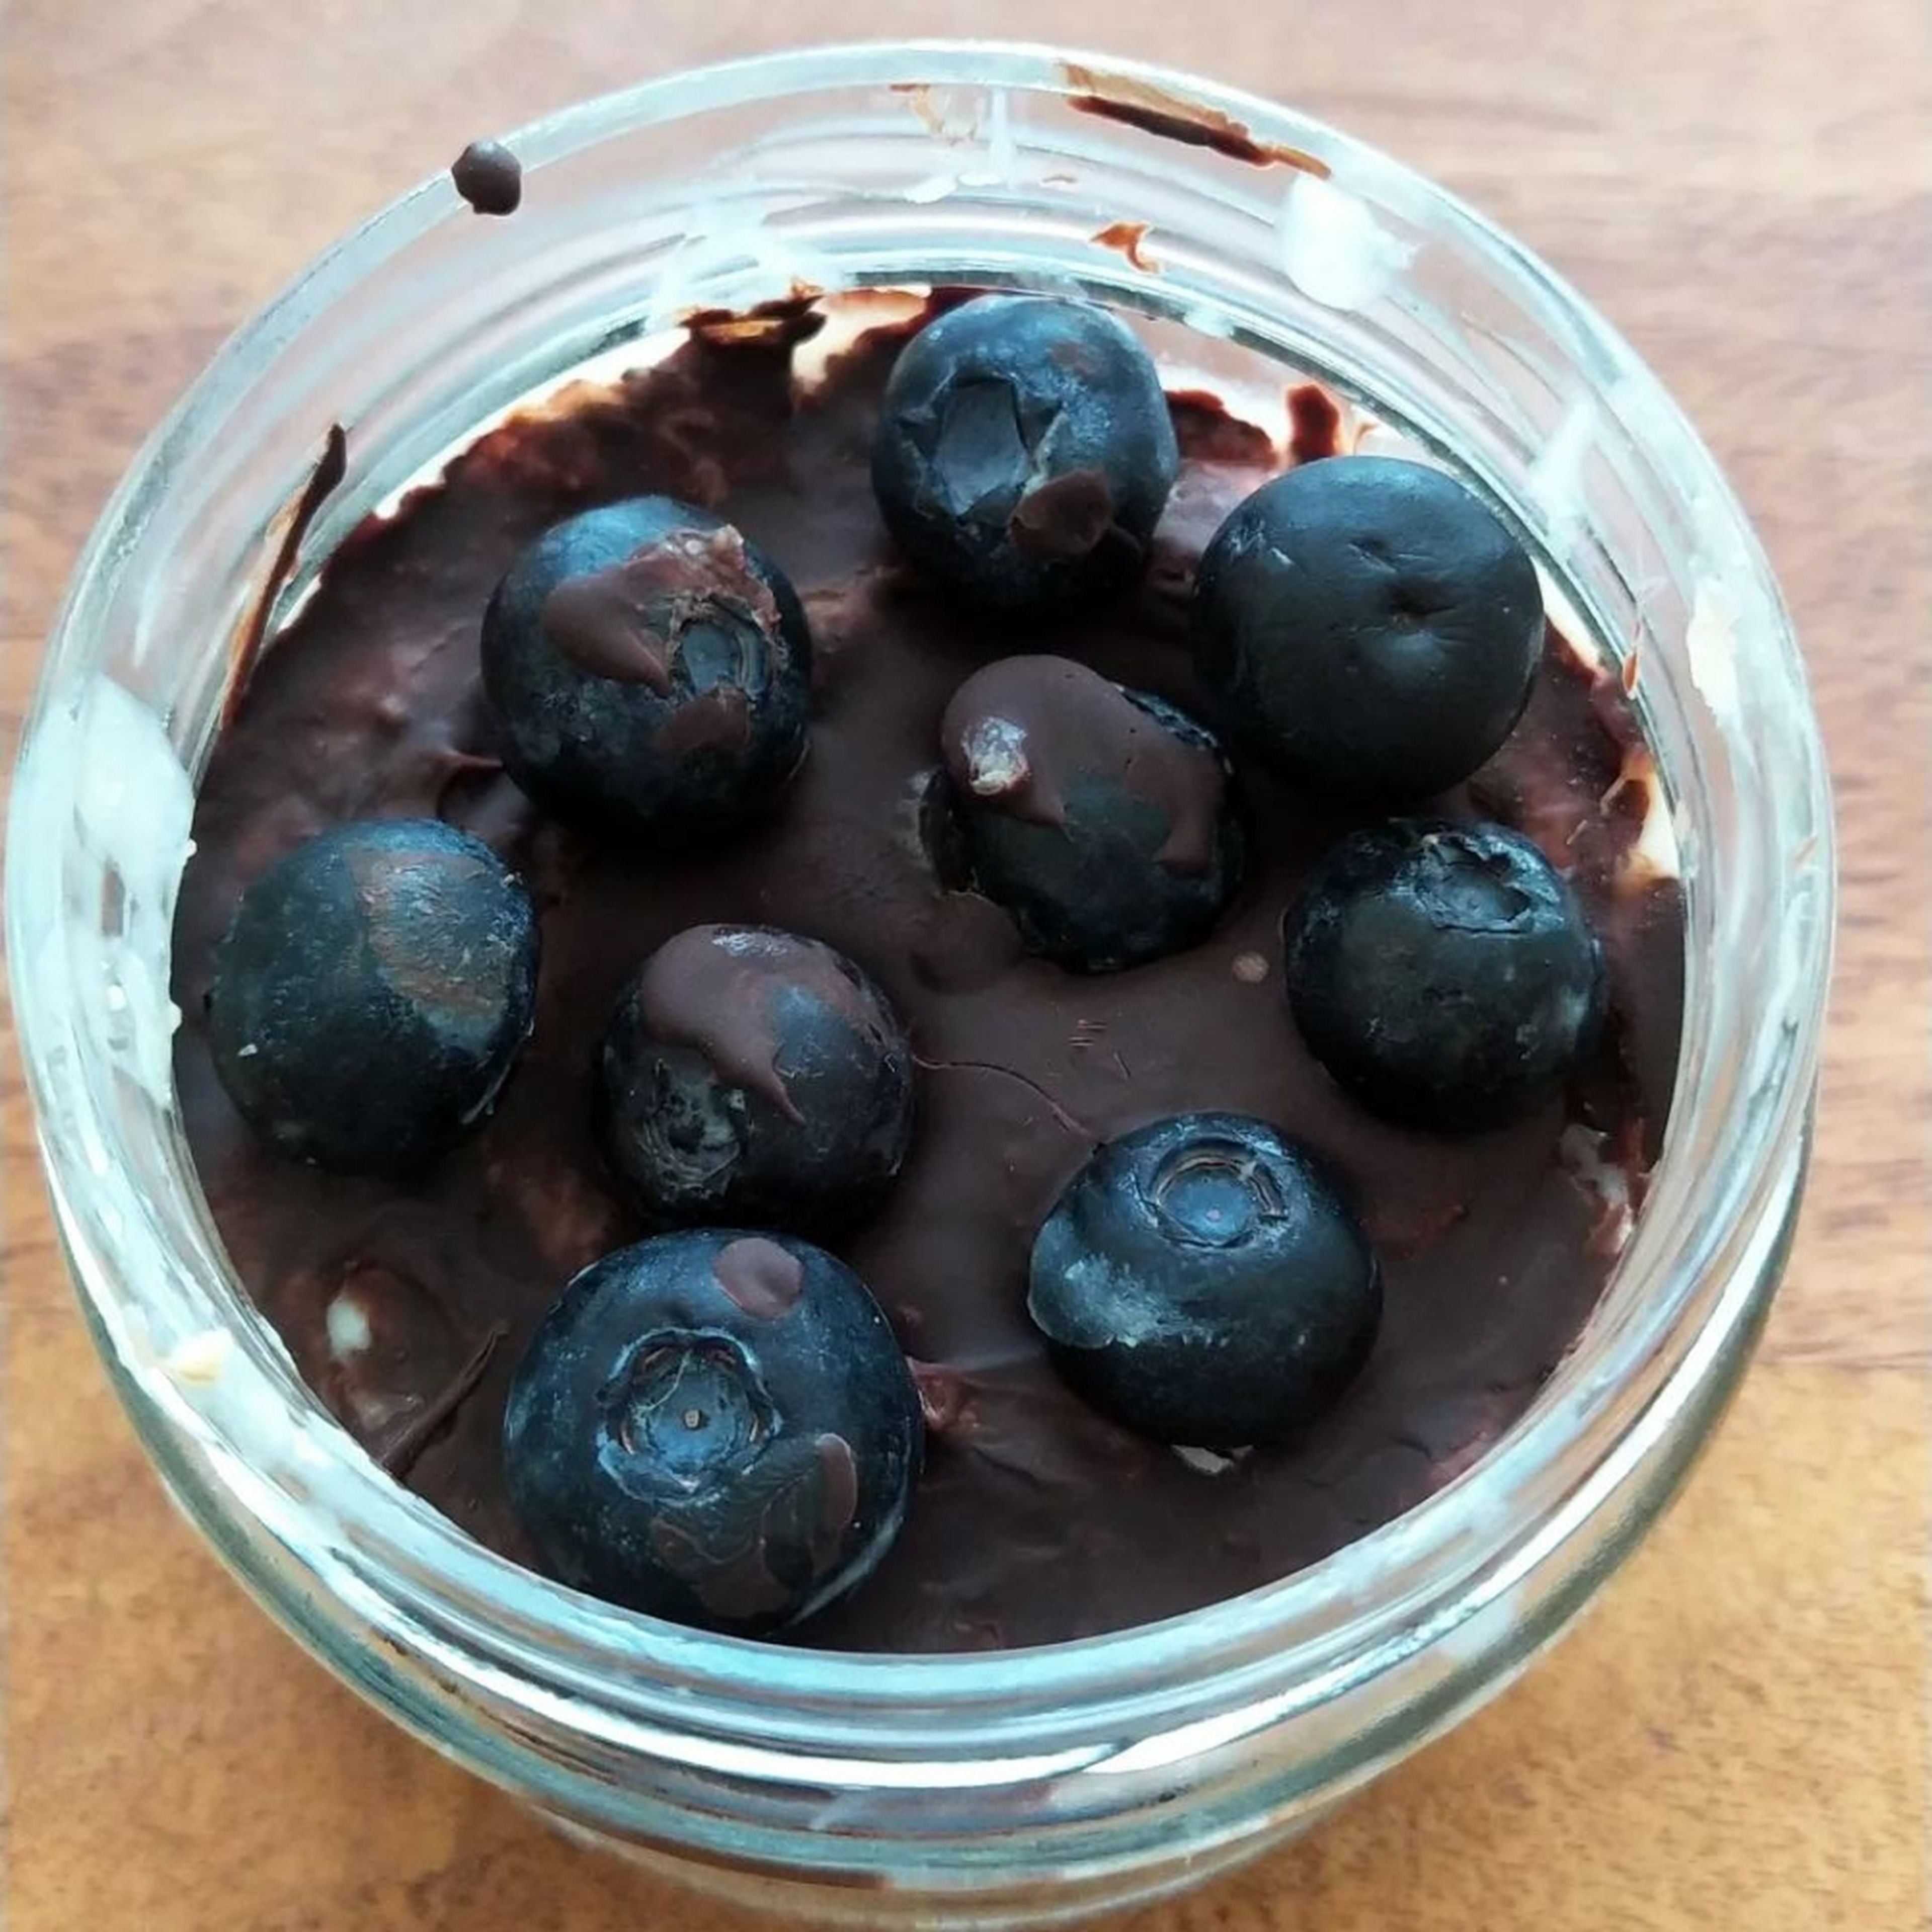 After waiting for 3 hours in the fridge, add the rest of the melted chocolate and blueberries on your oats and leave it overnight.that's it